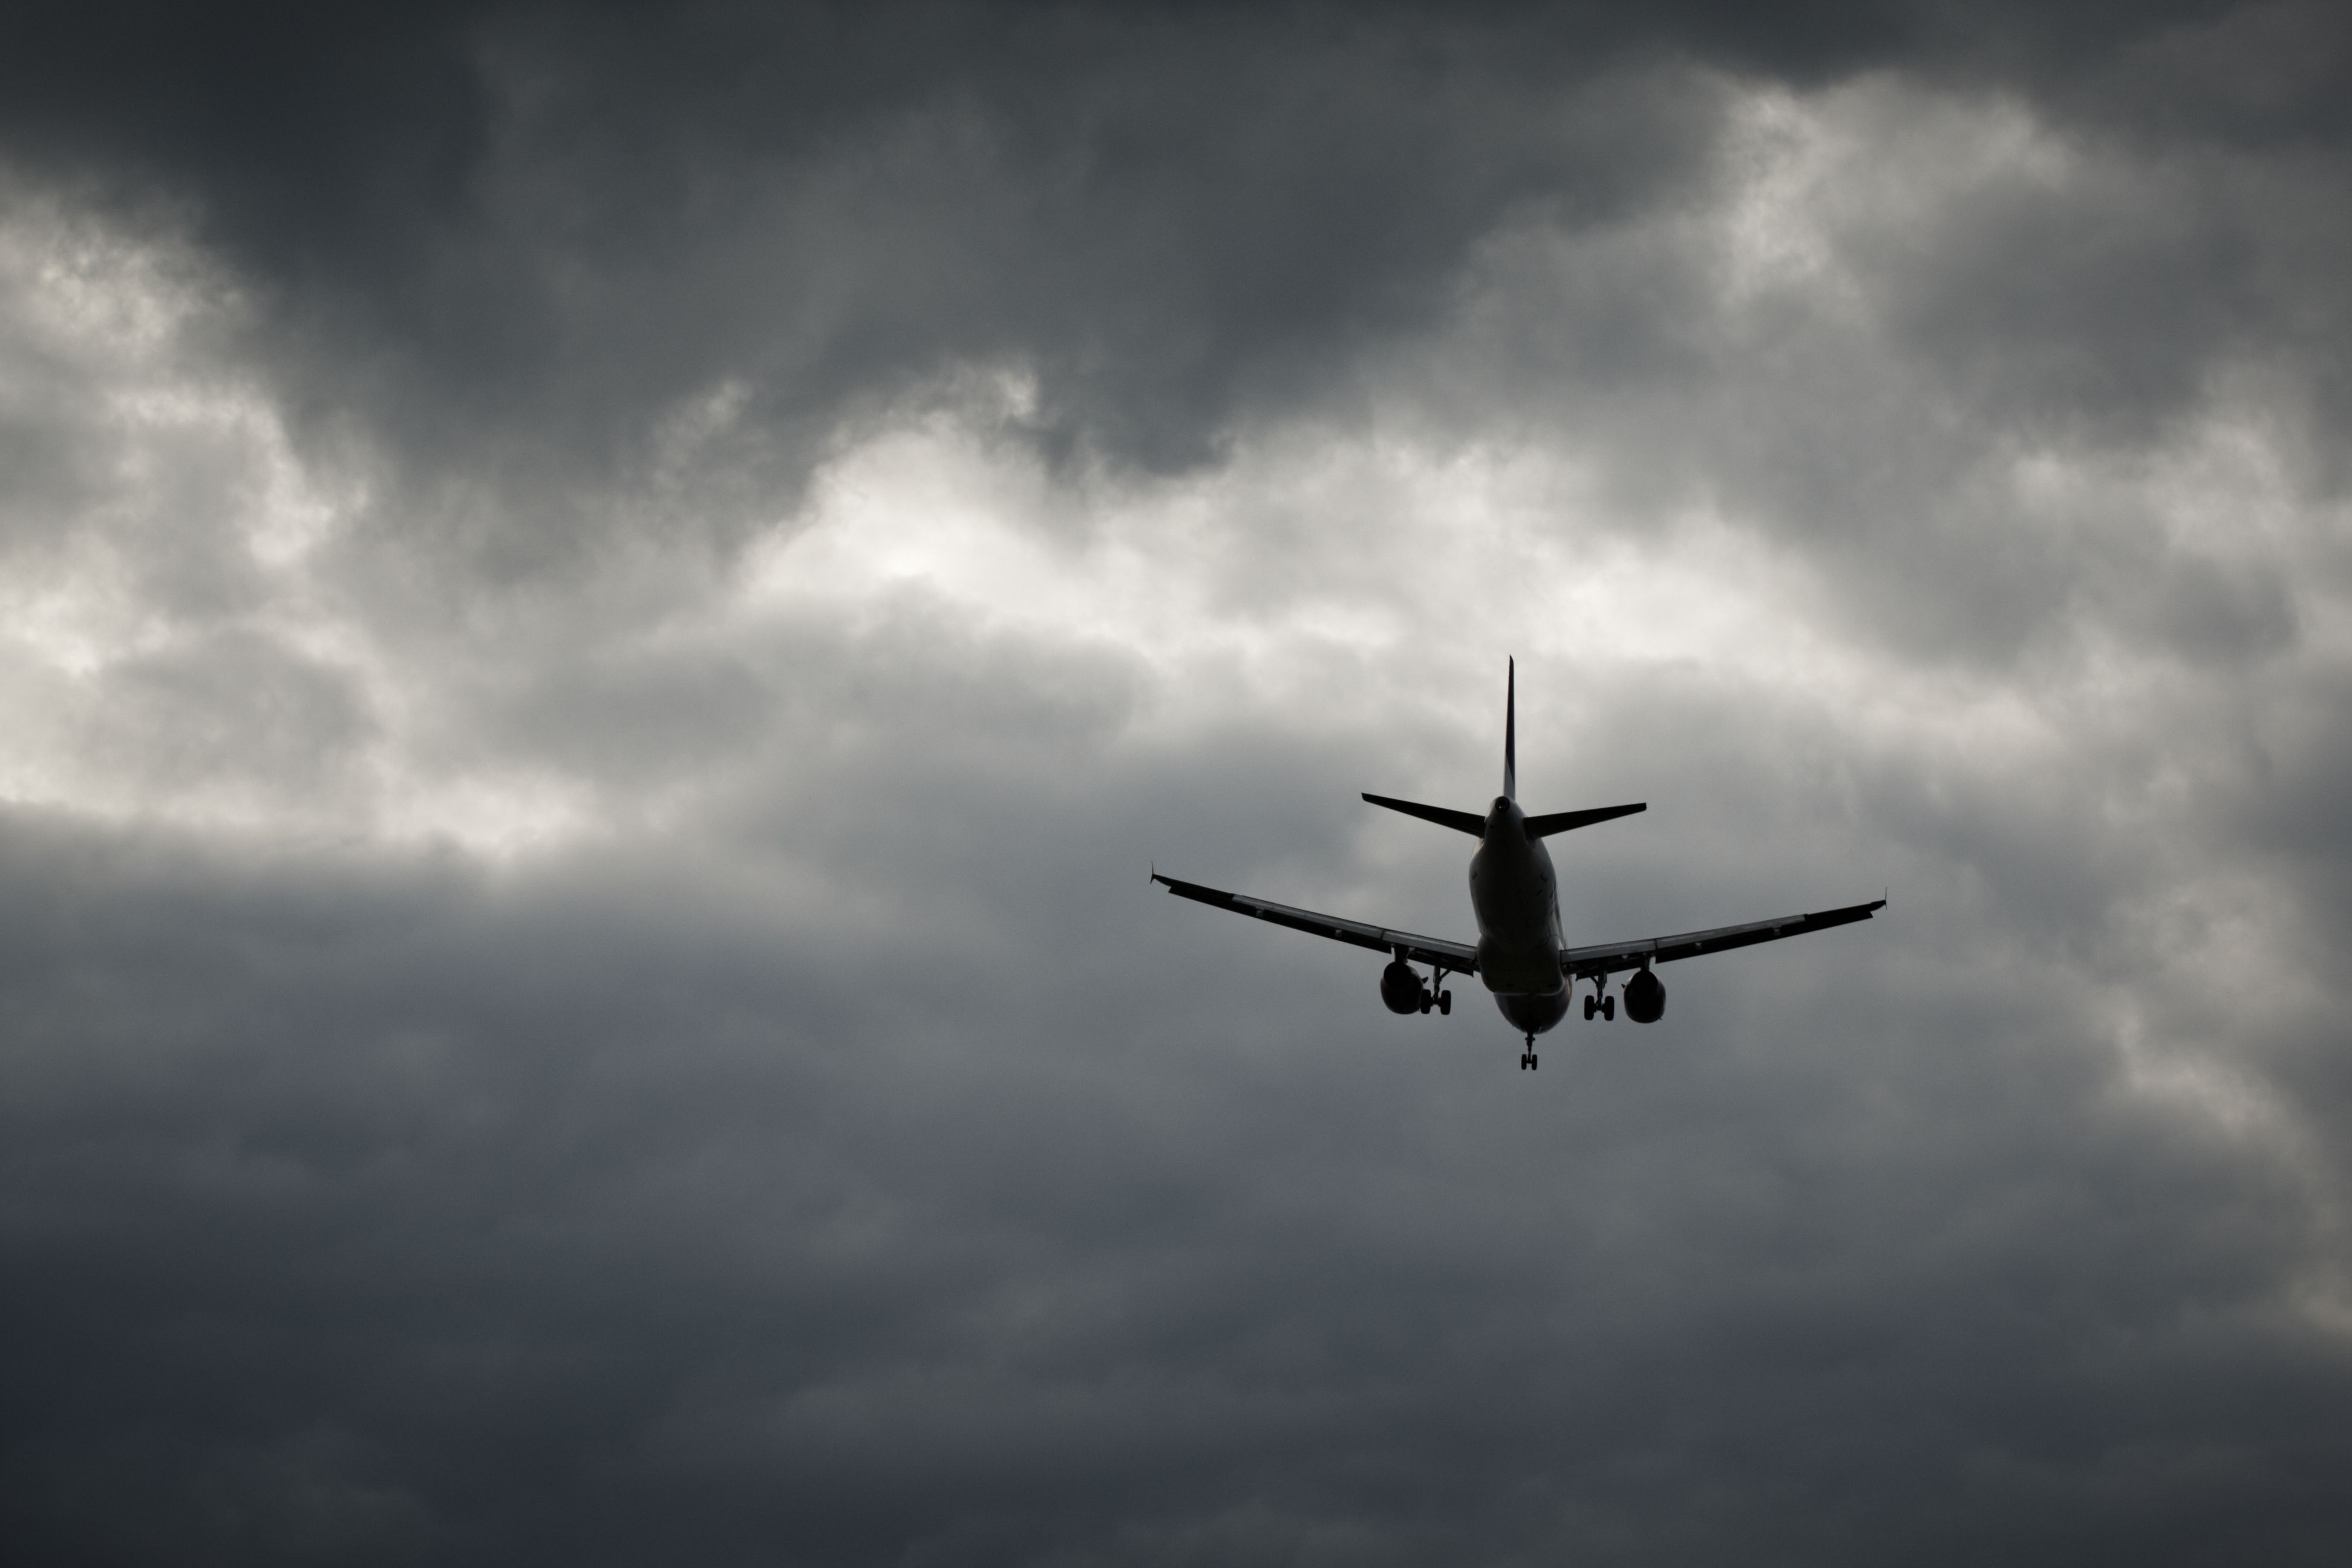 Plane In Storm Clouds Silhouette